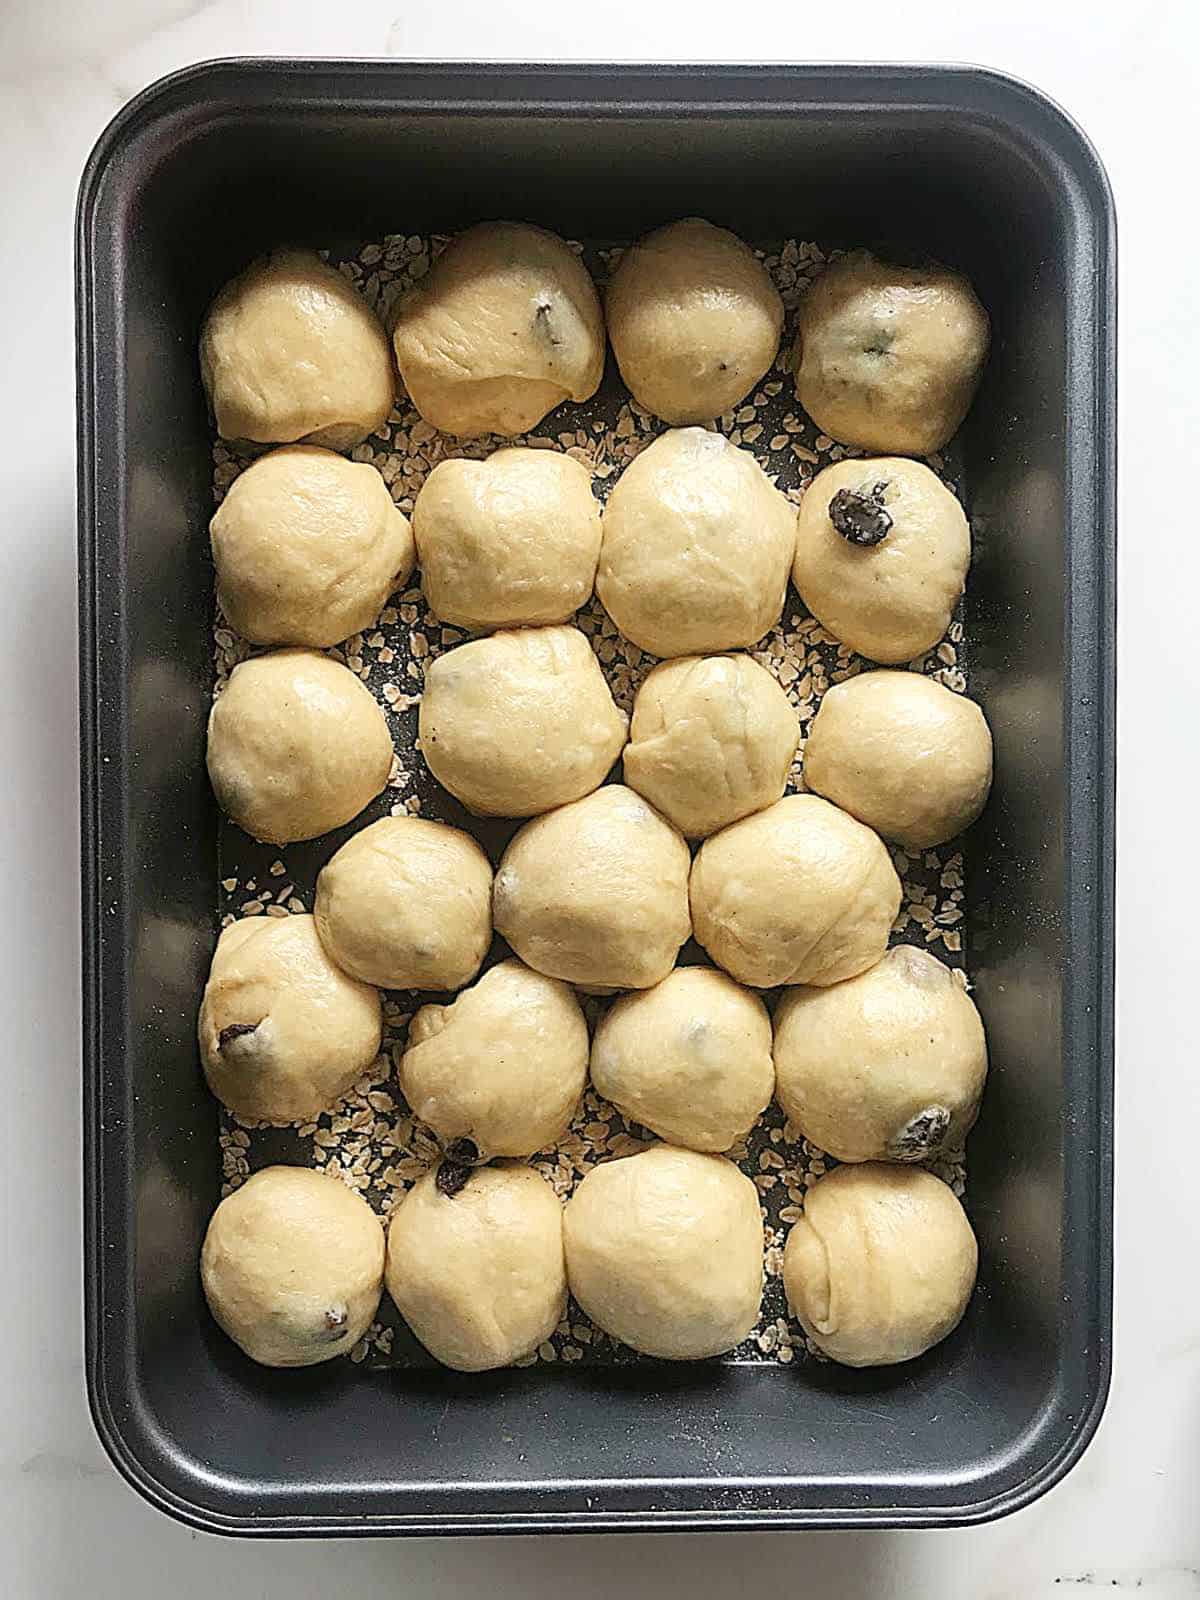 Small buns in rows in a rectangular metal pan before rising.